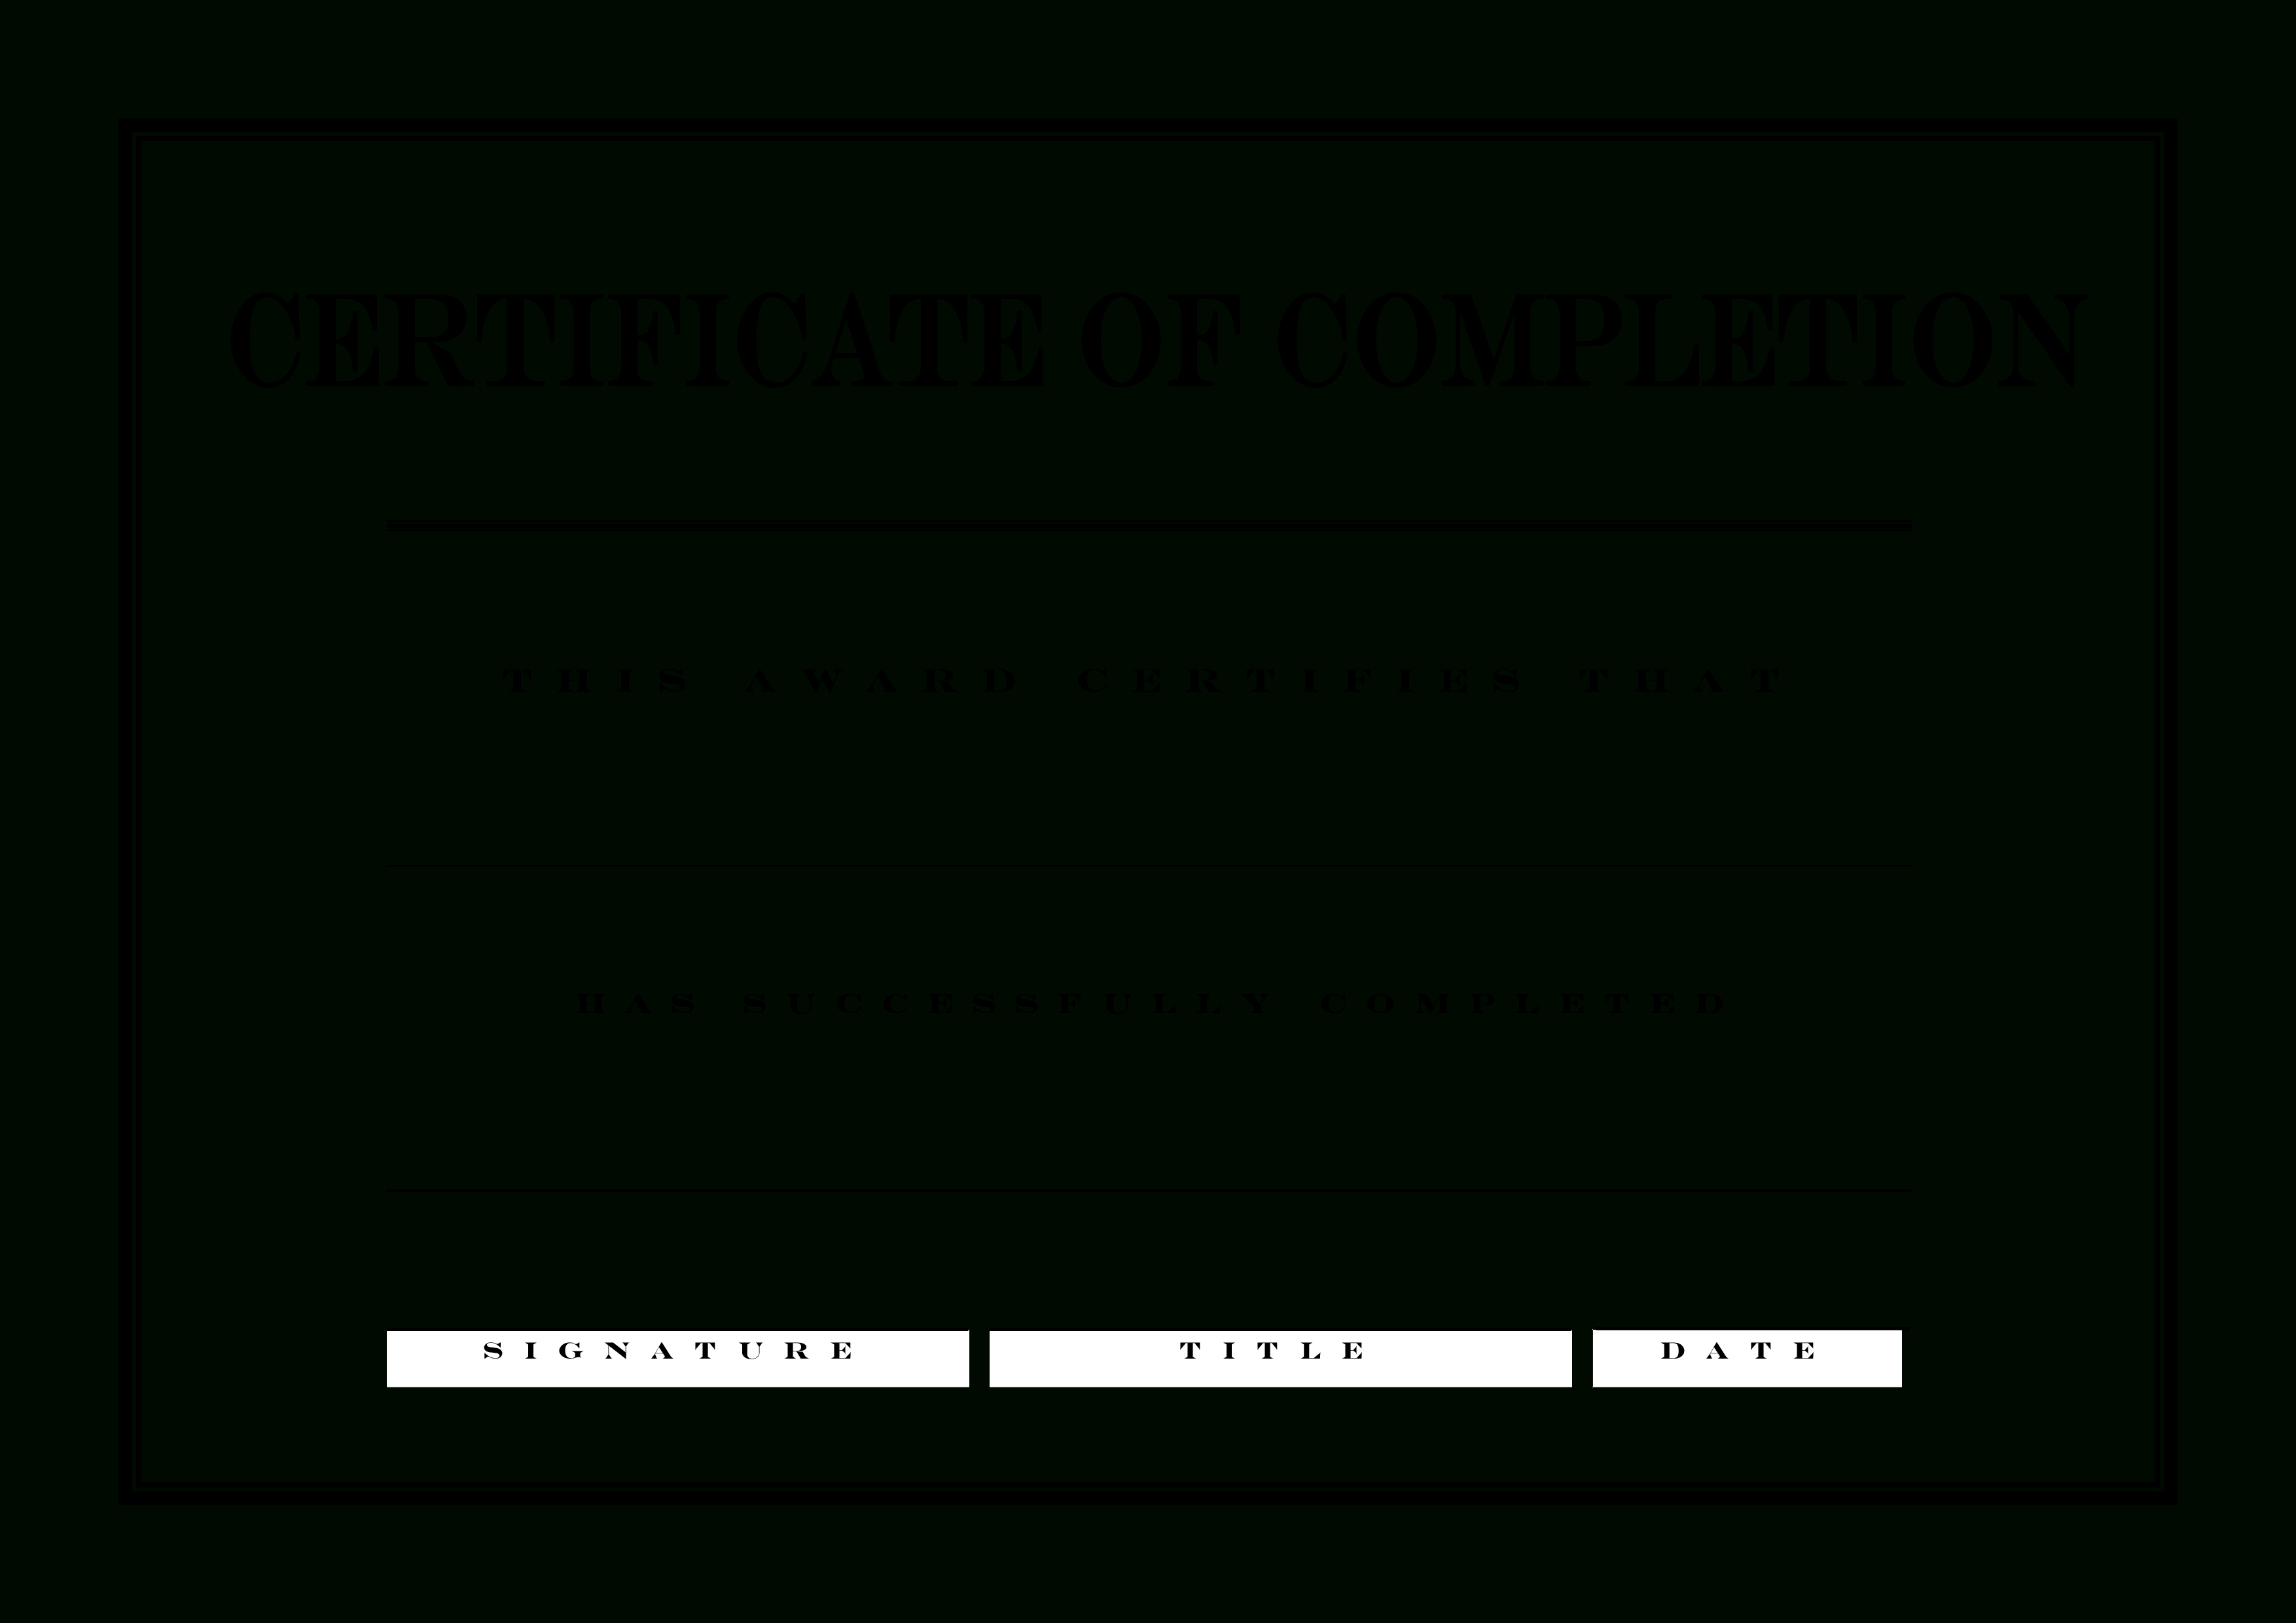 Free Certificate Of Completion | Templates At Allbusinesstemplates - Free Printable Blank Certificates Of Achievement